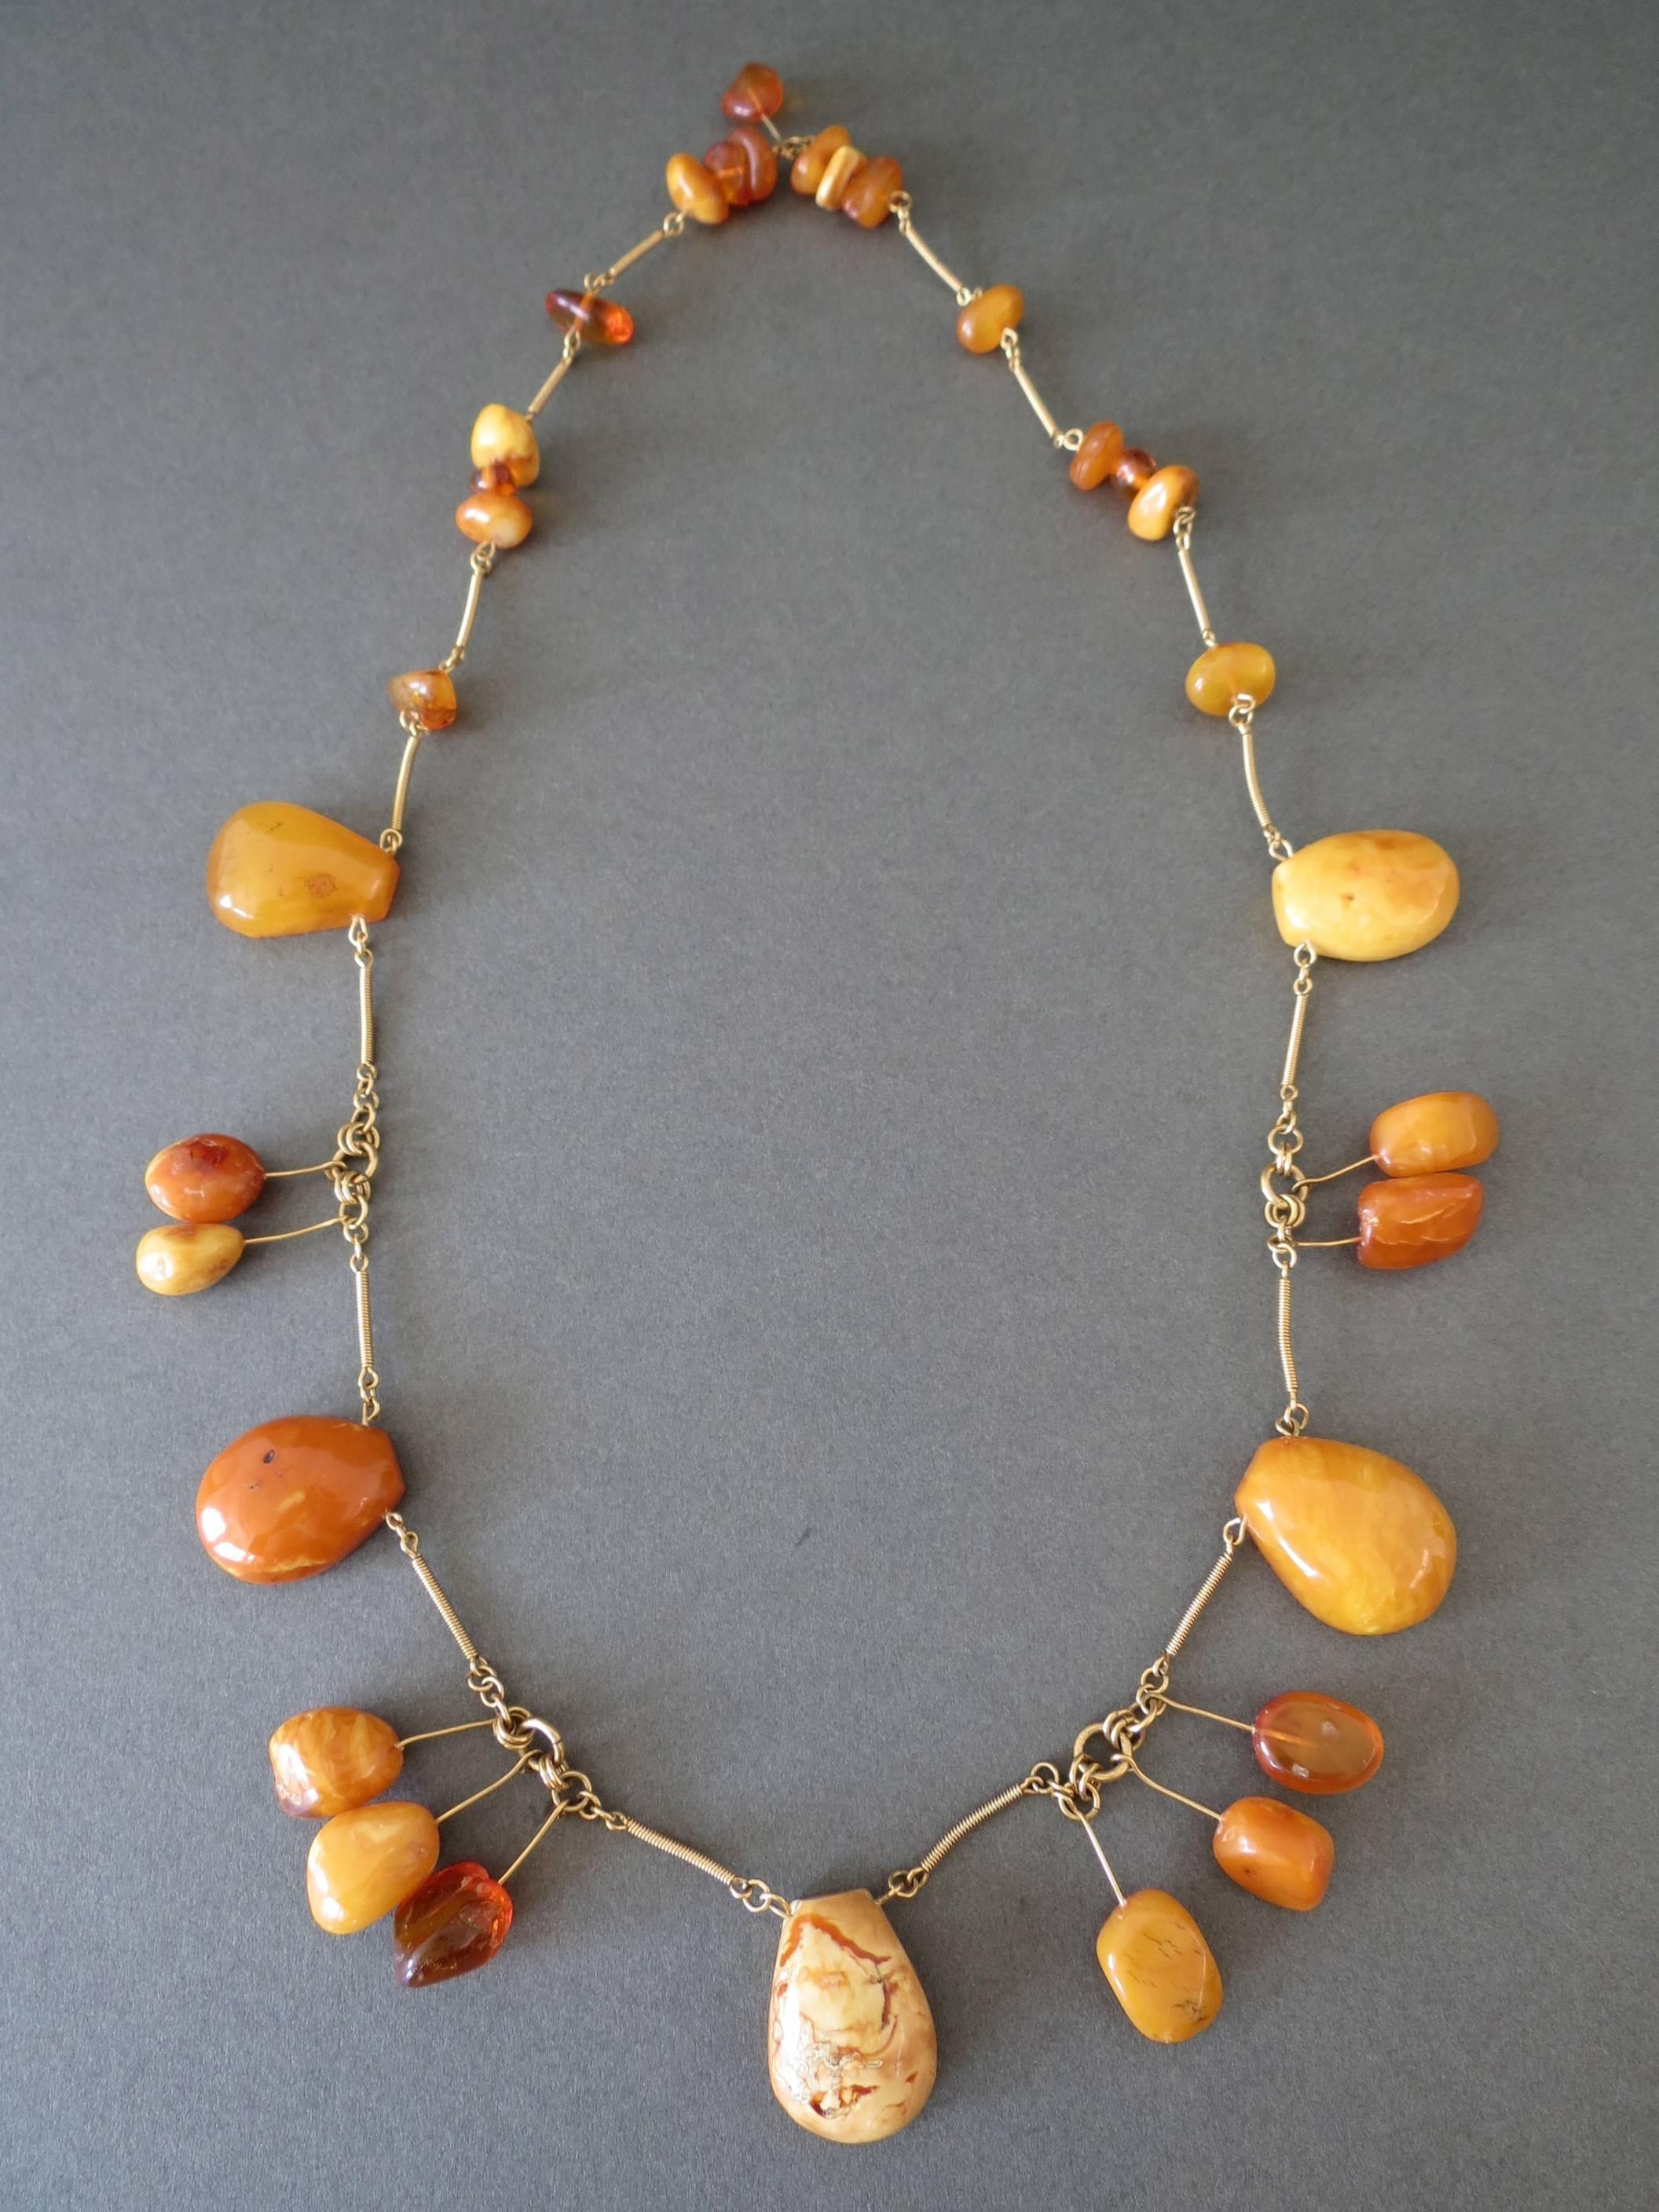 This is lovely long natural baltic amber necklace and in good condition. 
Item Specifics
Length: 74cm (approx 29.00